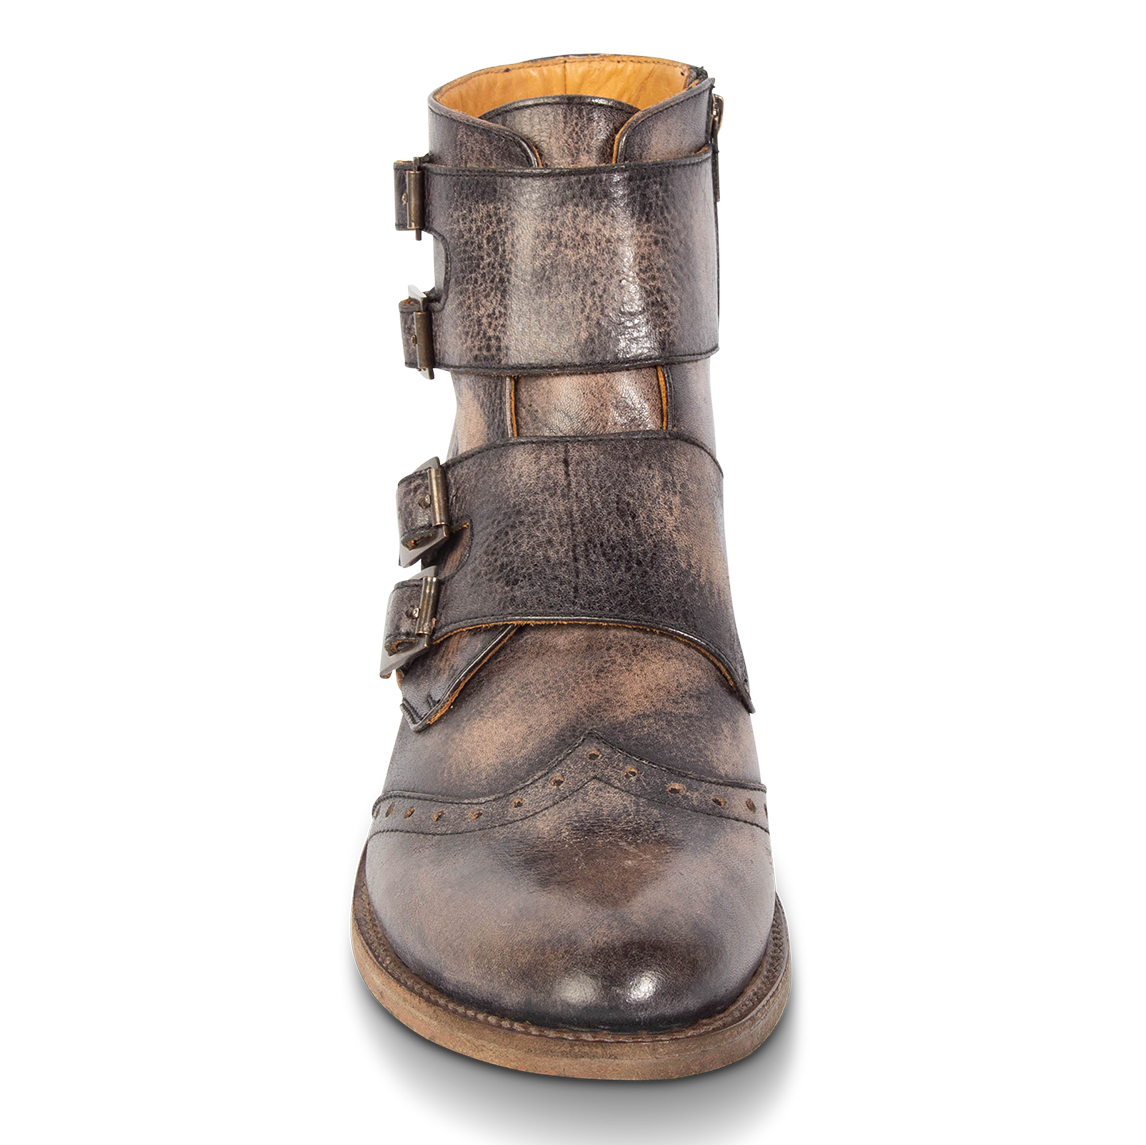 Front view showing double leather in-strep straps on FREEBIRD men's Penn black dress boot